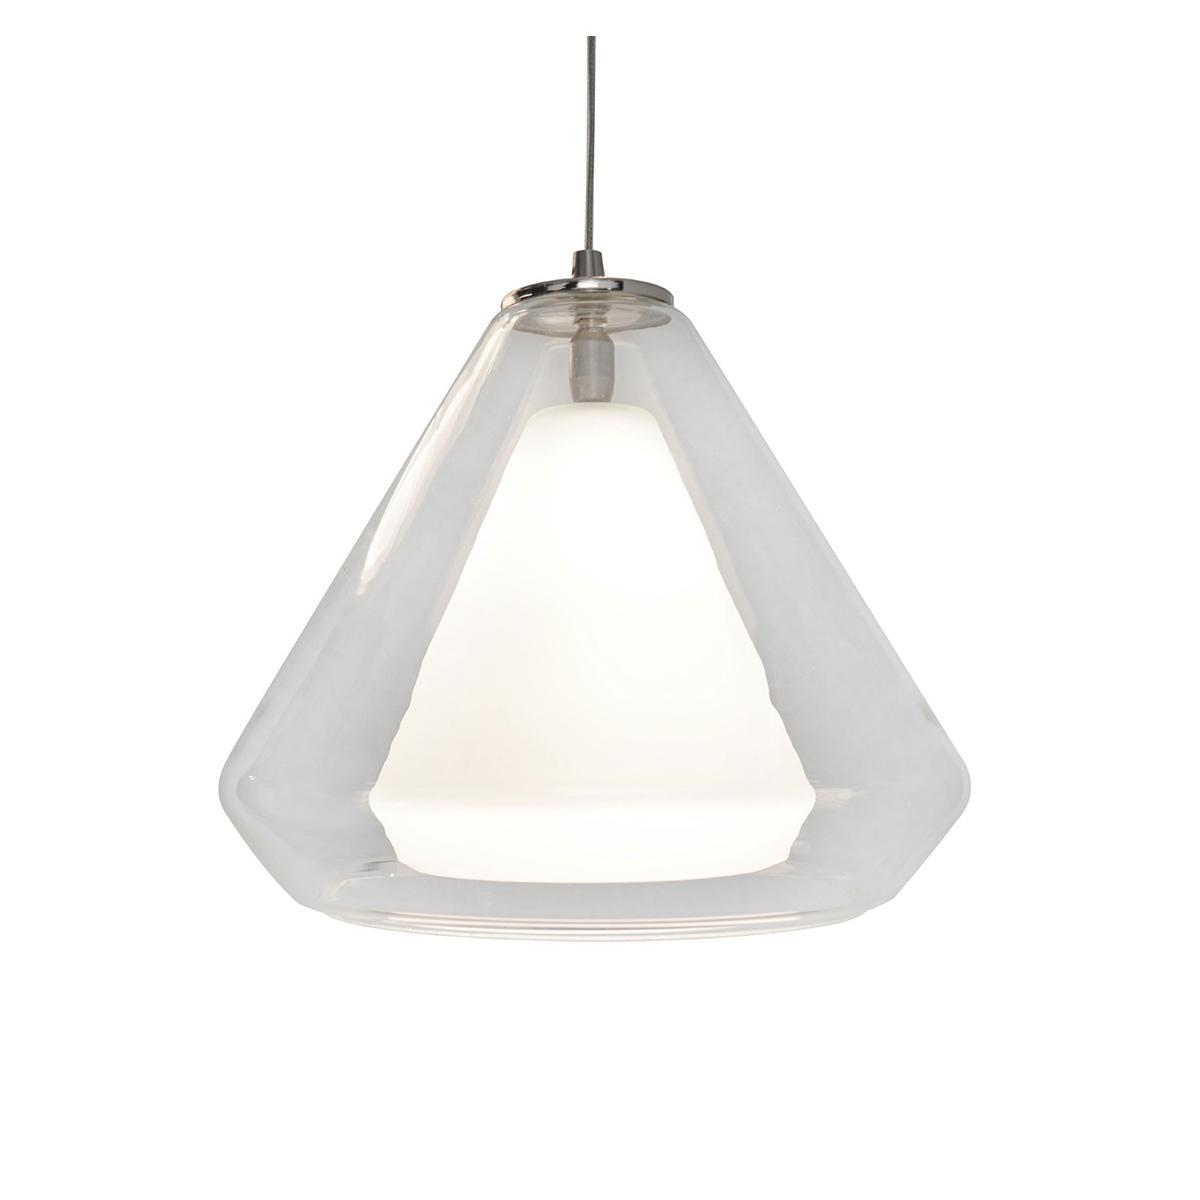 Armitage 10 in. LED Pendant Light 120-277V 3000K Satin Nickel finish with Clear & White shade